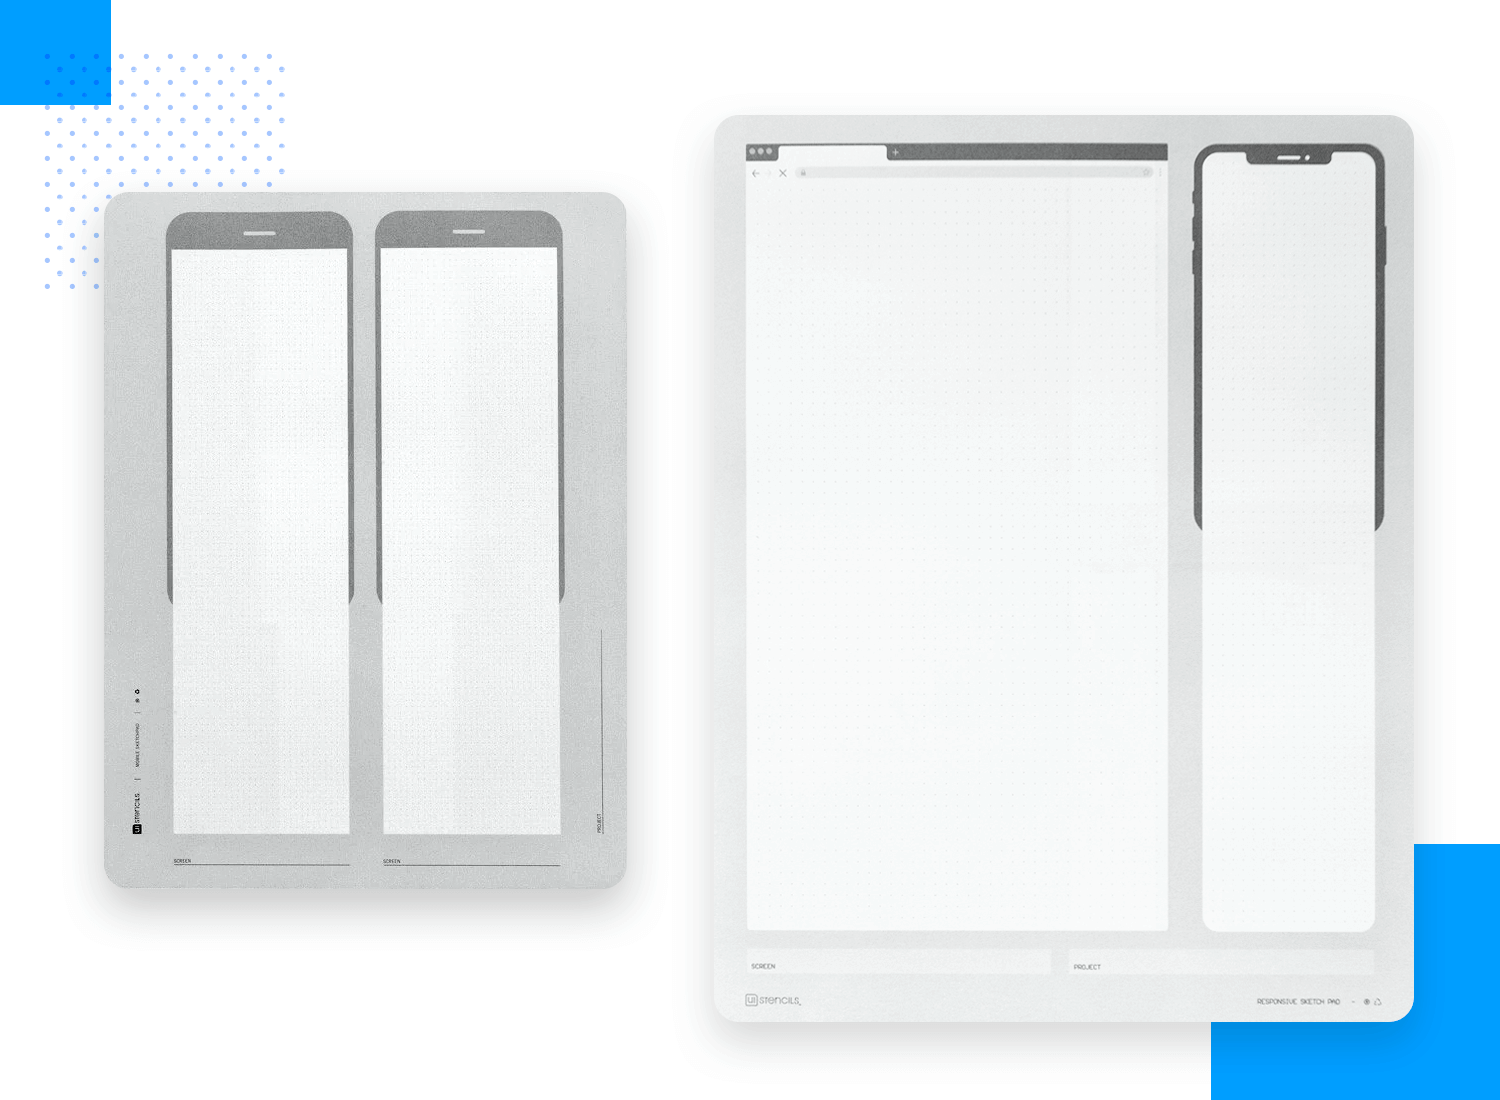 Paper prototyping templates - expandable sketch pads